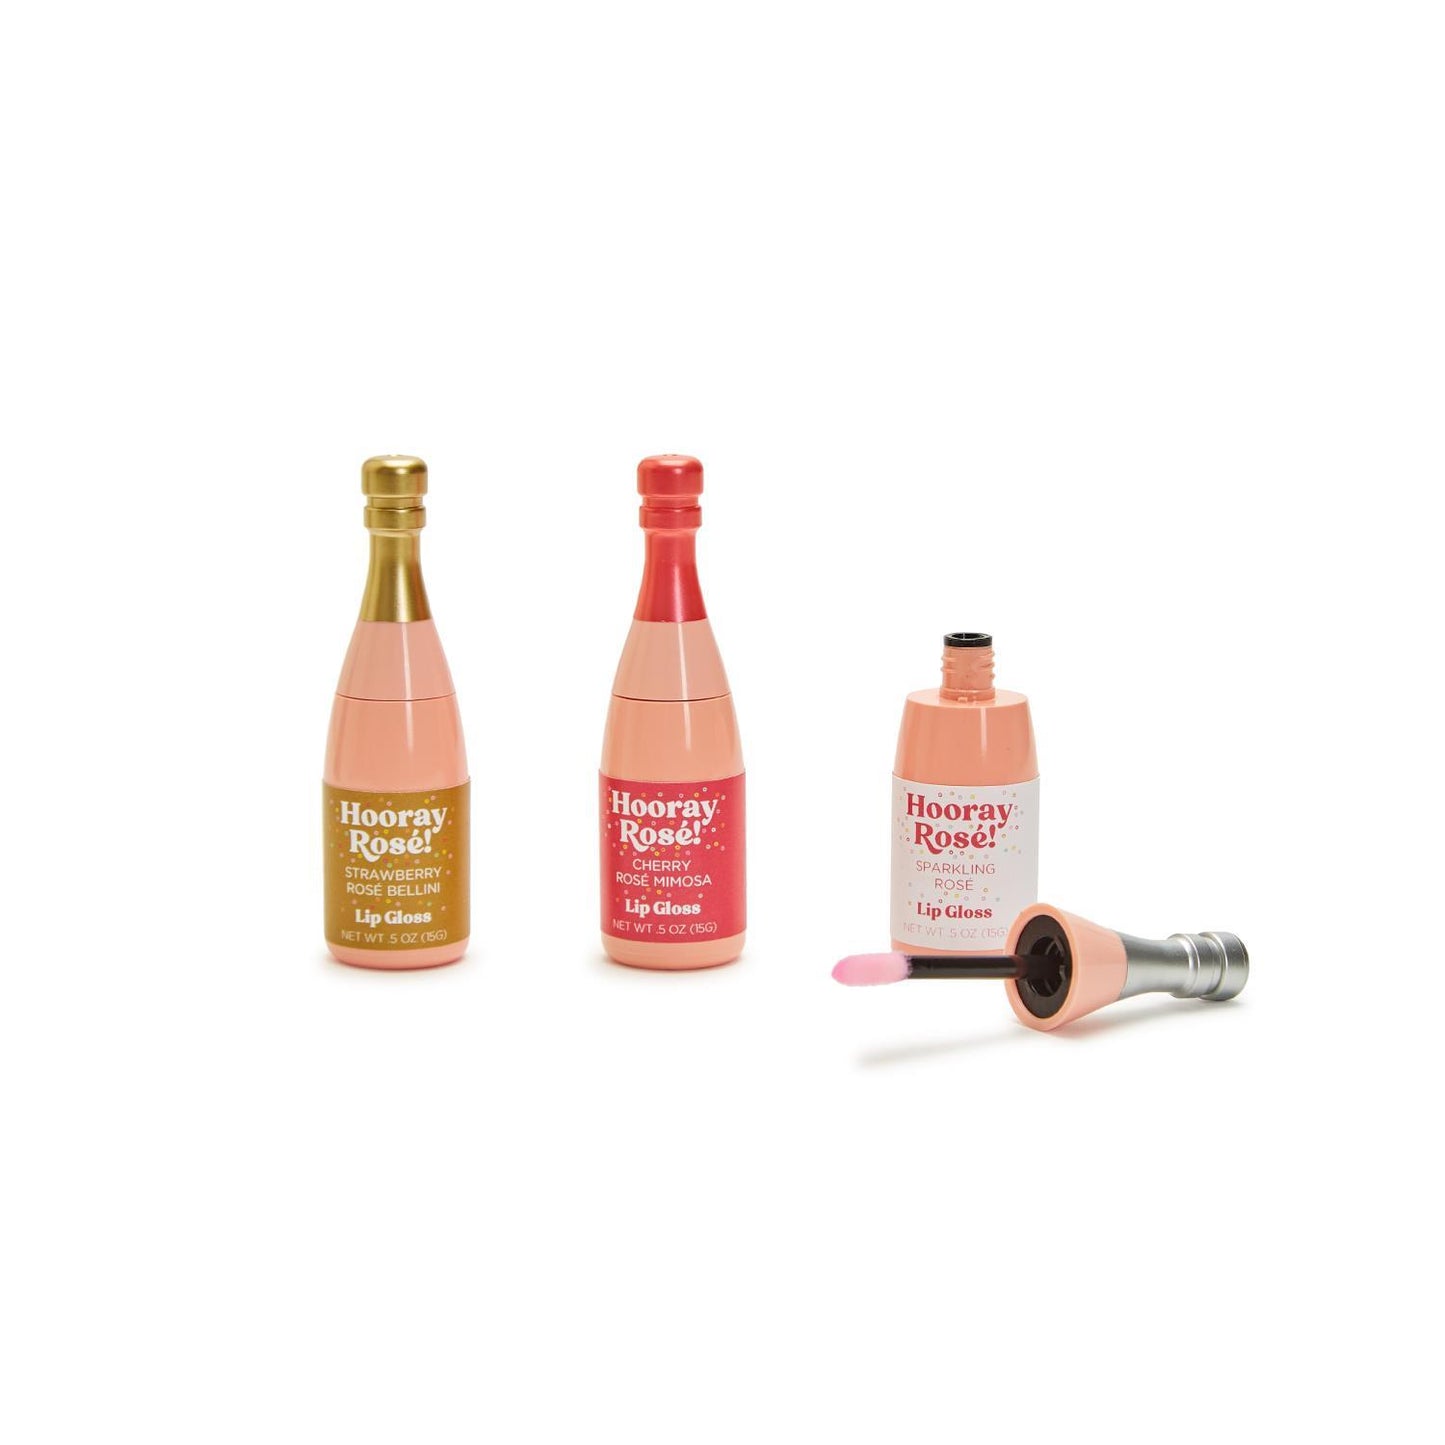 Hooray Rose! Champagne Bottle Lip Gloss: Available In Three Scents